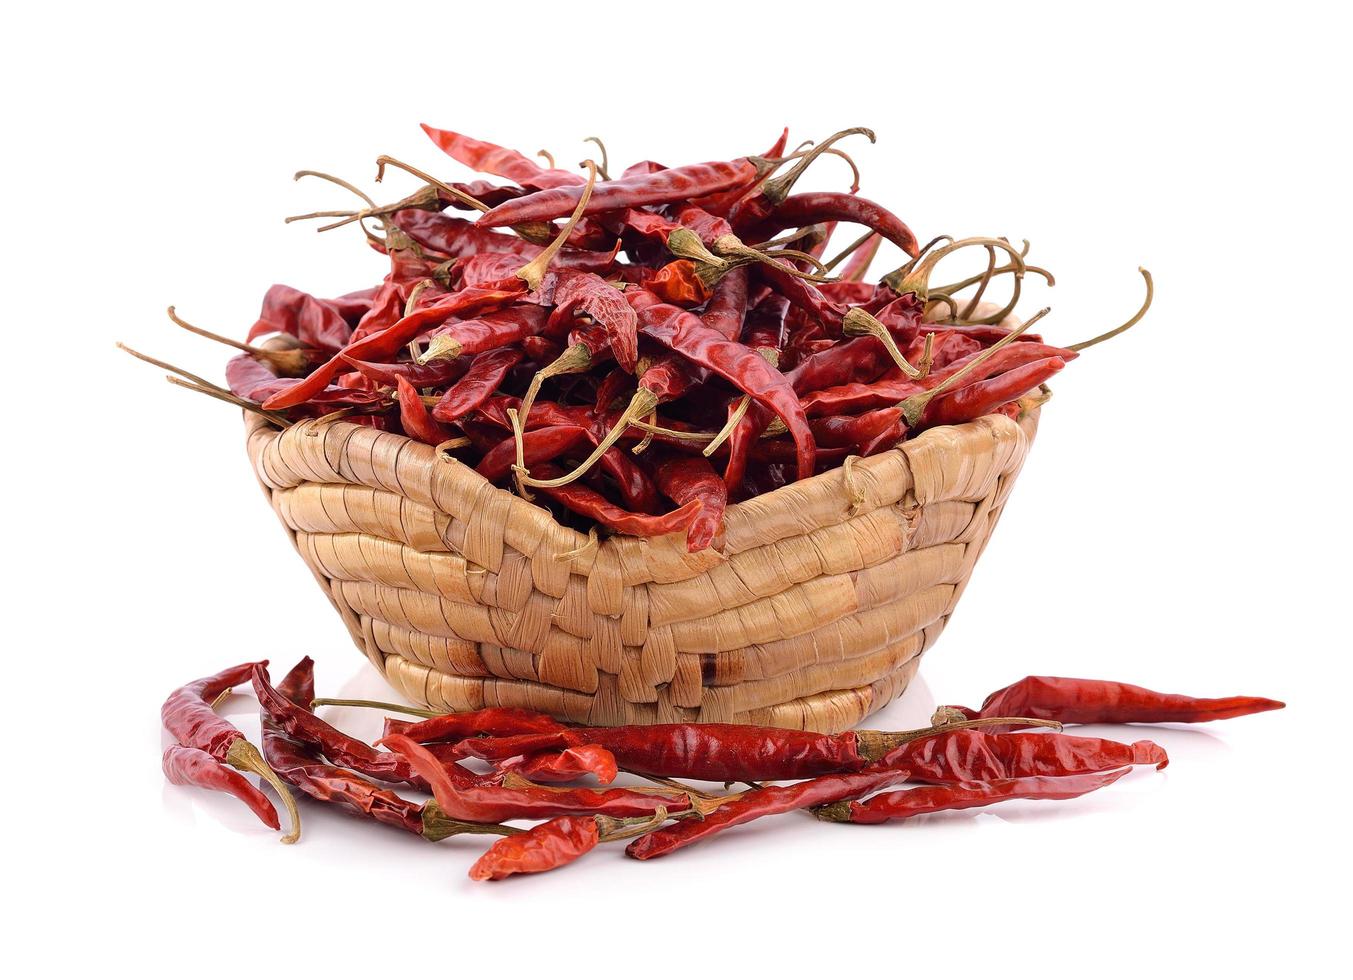 Dried chili in the basket on white background photo